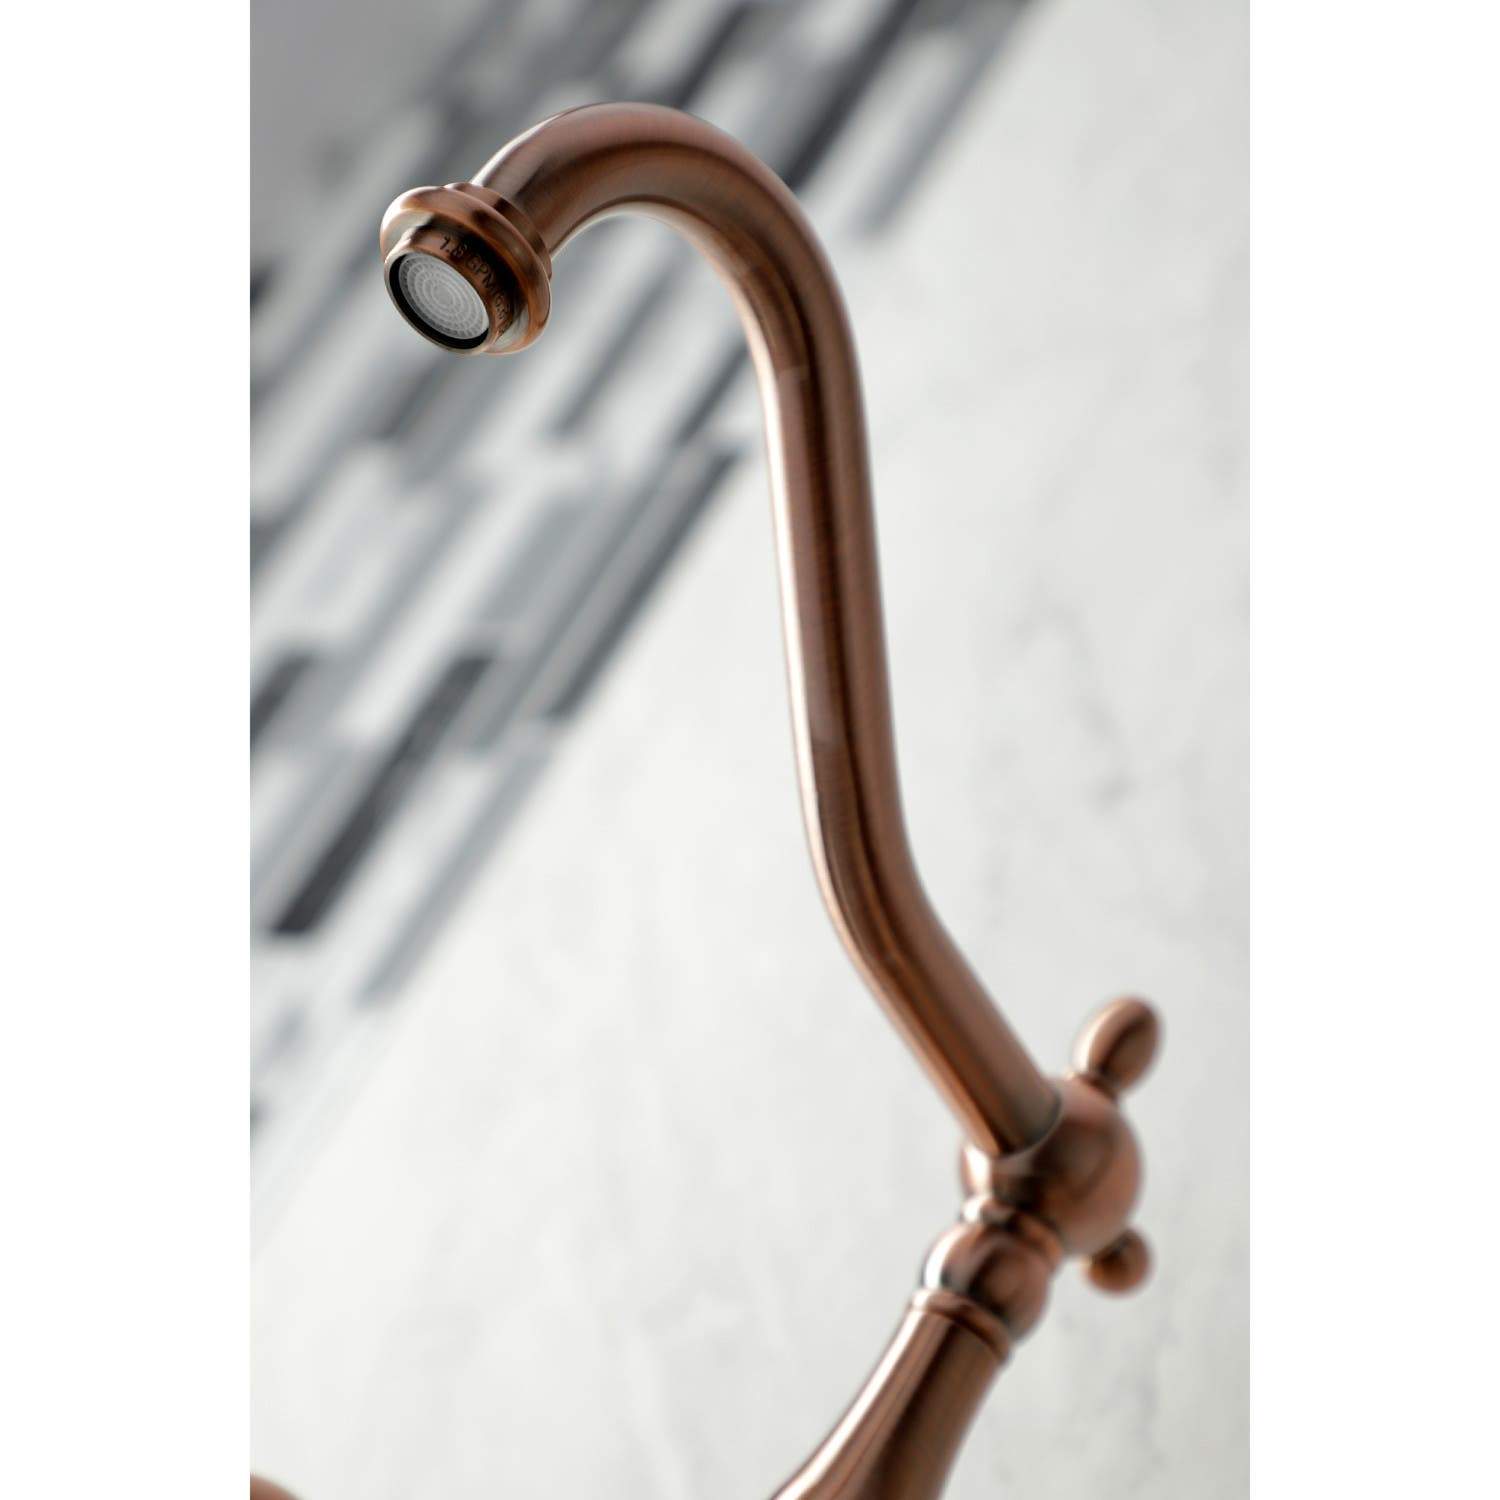 Kingston Brass KS124AXBSAC Heritage Two-Handle Wall Mount Bridge Kitchen Faucet with Brass Sprayer, Antique Copper